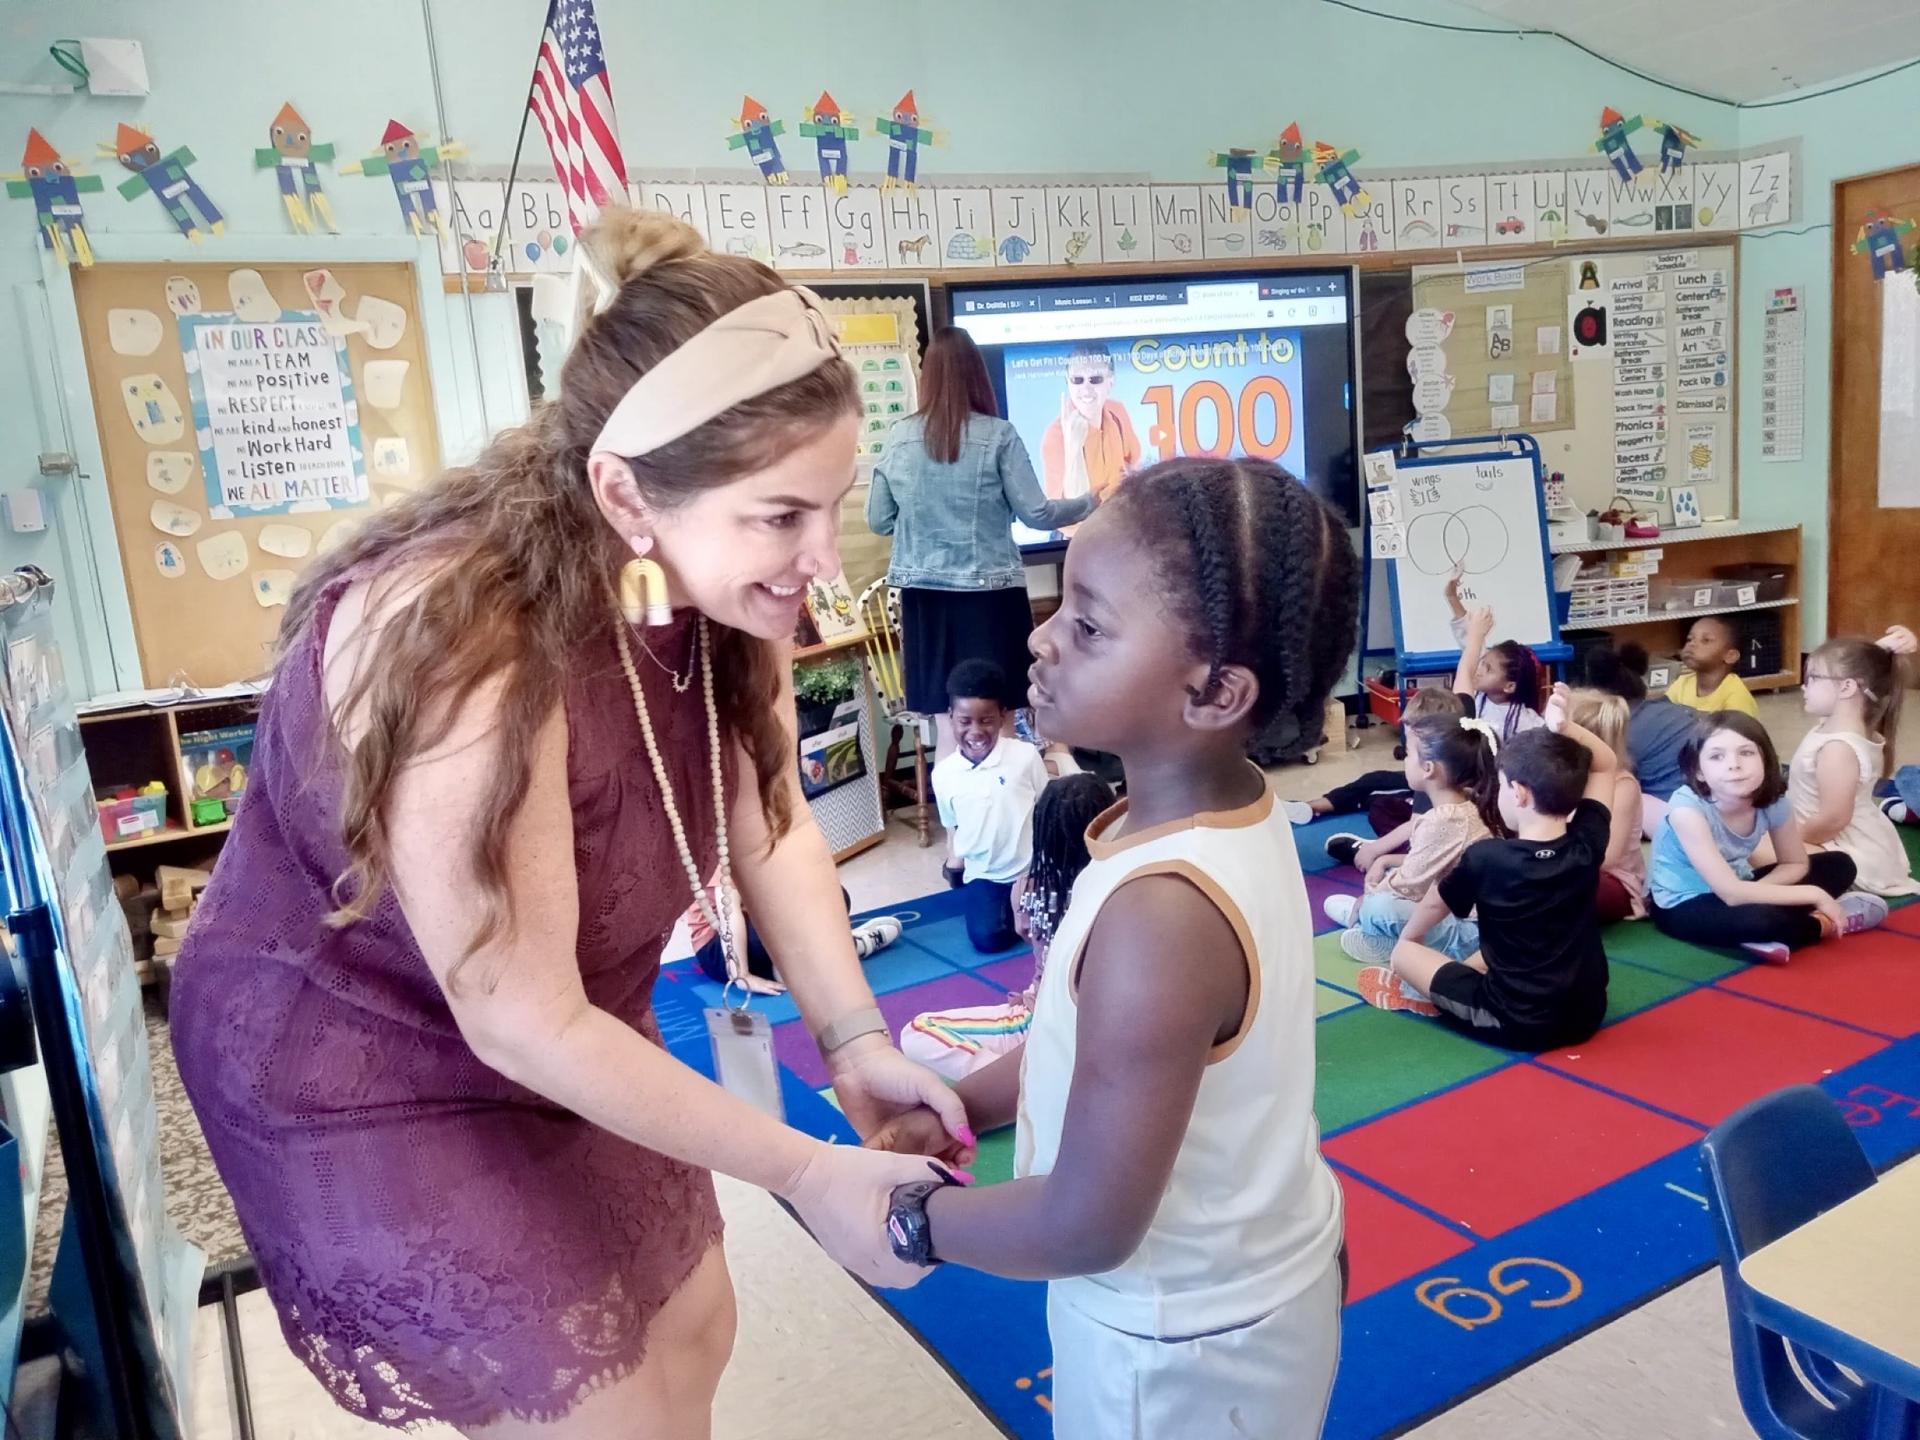 A woman wearing a headband and maroon dress talks to a young child in a busy classroom